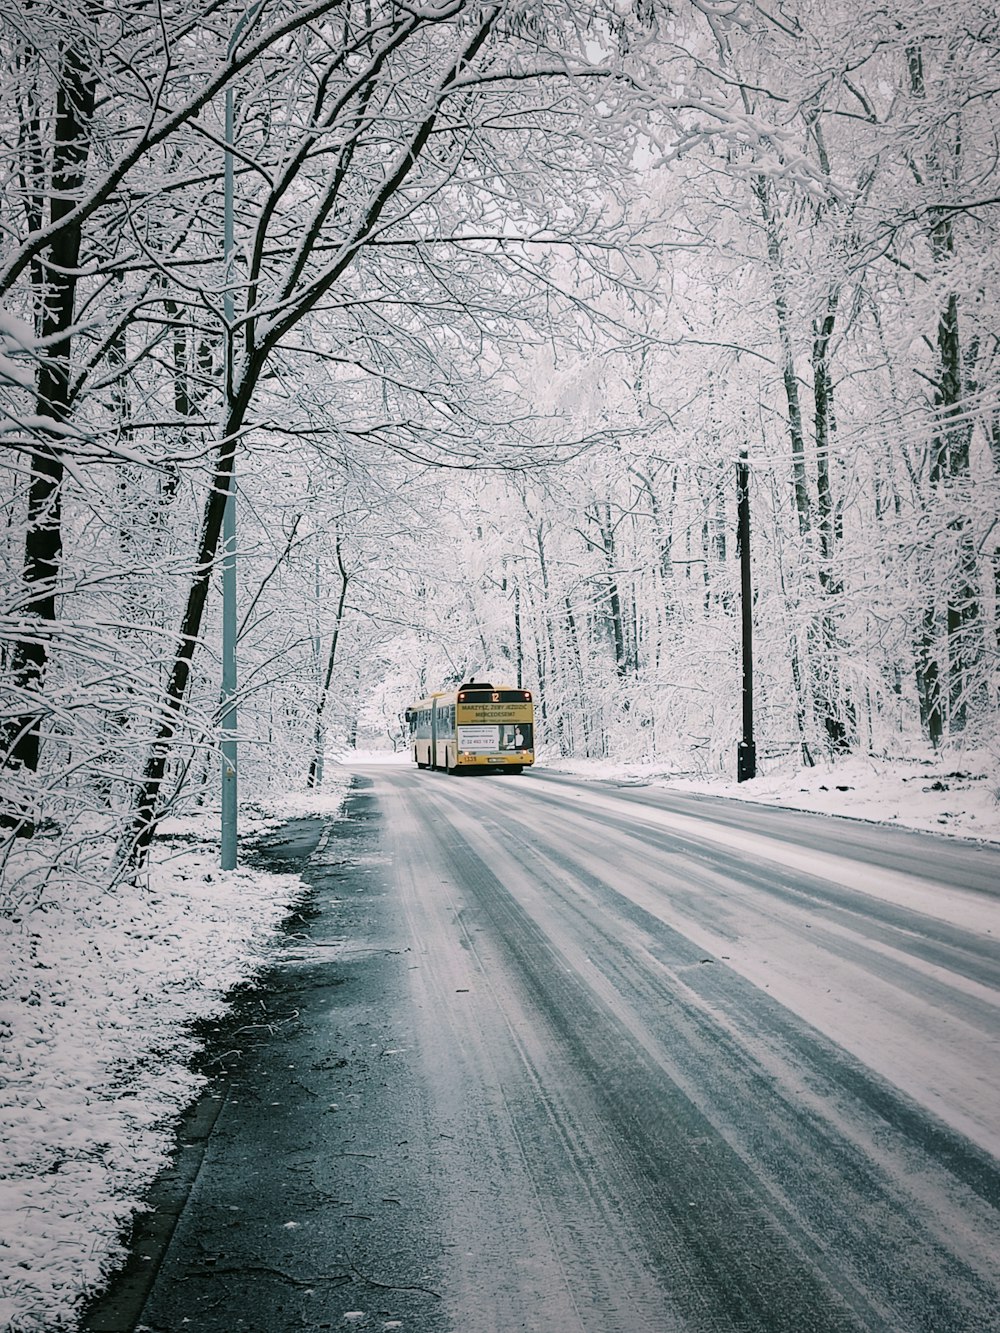 a school bus driving down a snow covered road